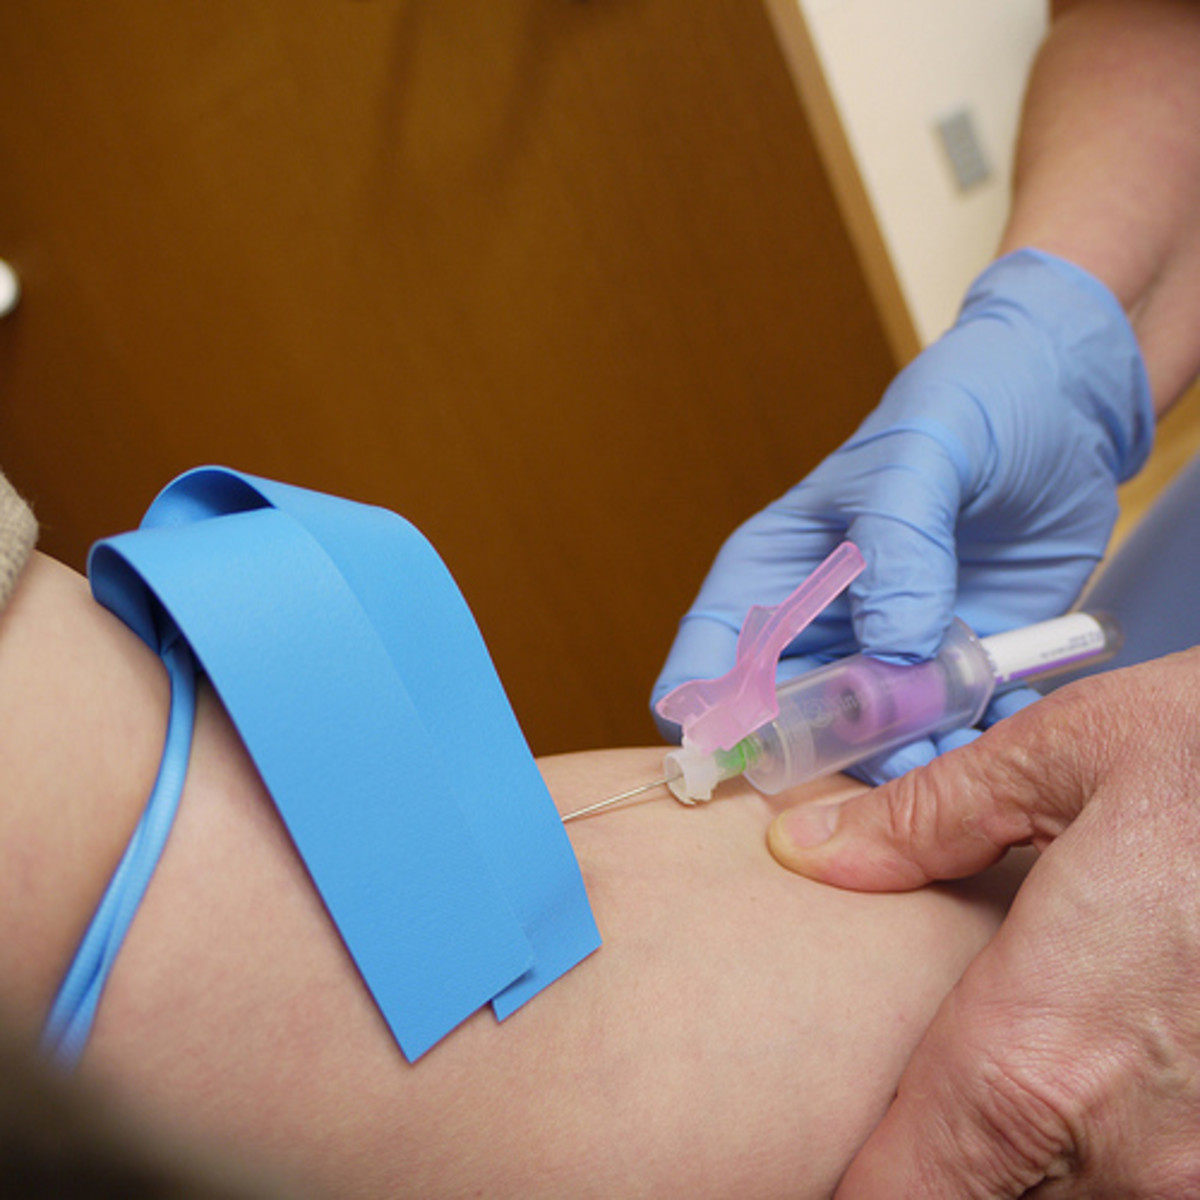 How to Find the Best Phlebotomy Training Program